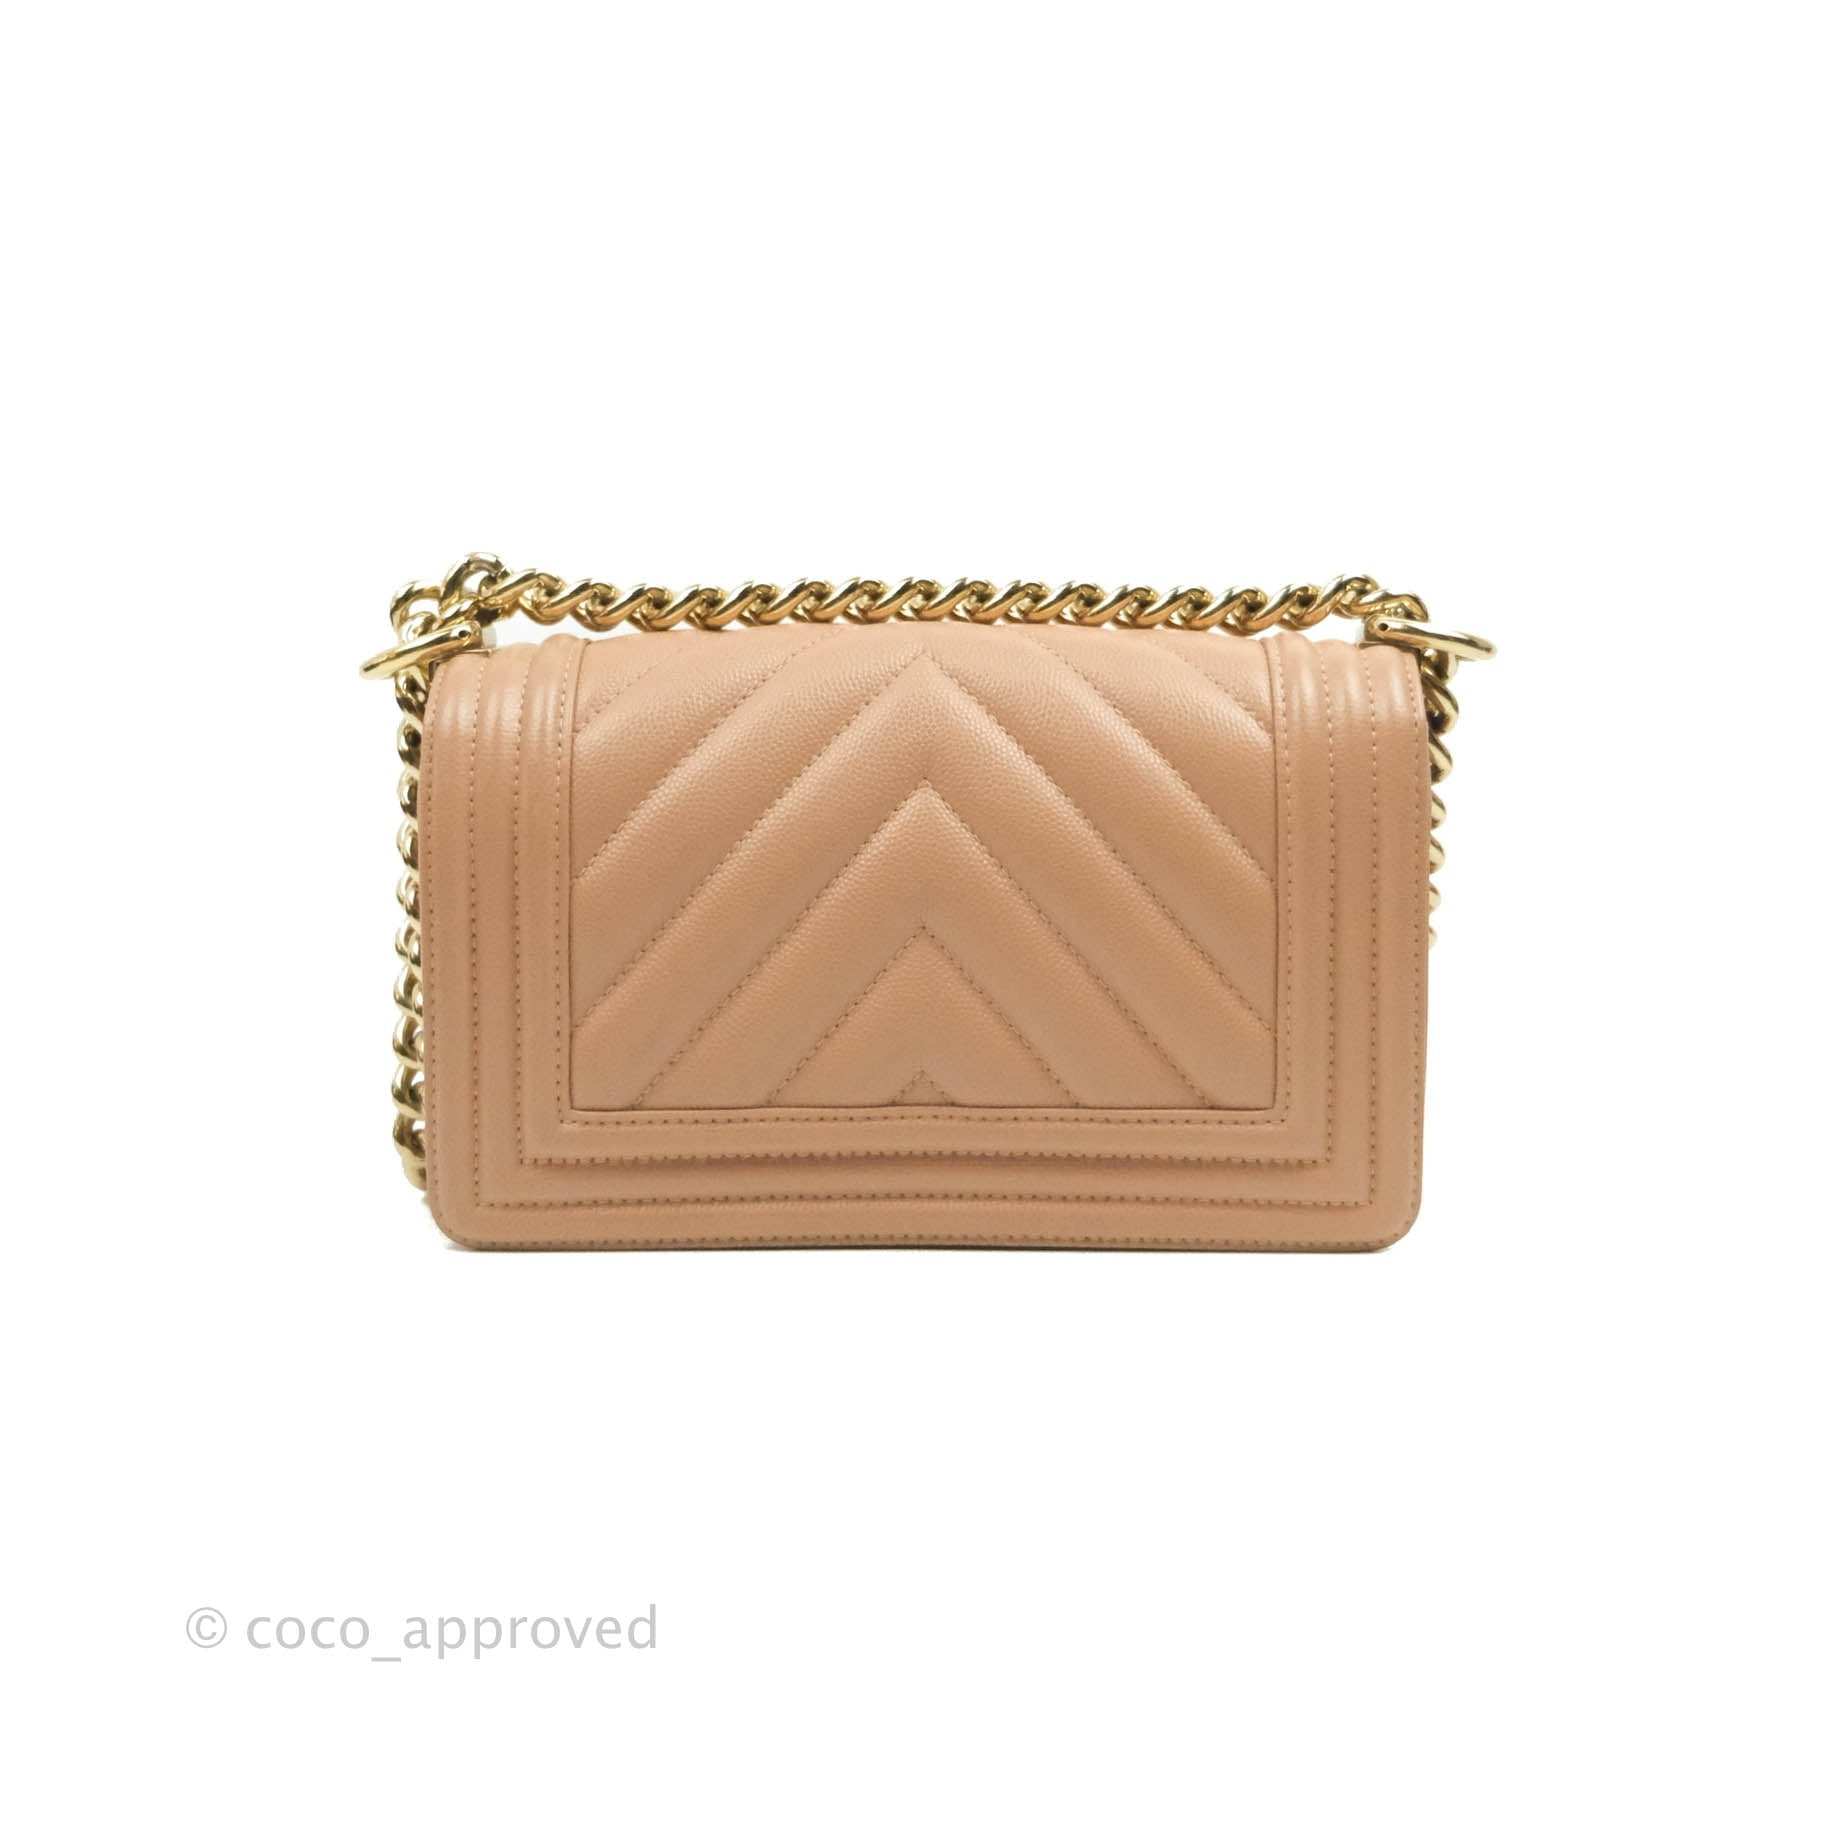 Only 1398.00 usd for Small Chevron Boy Bag in Dark Pink Lambskin